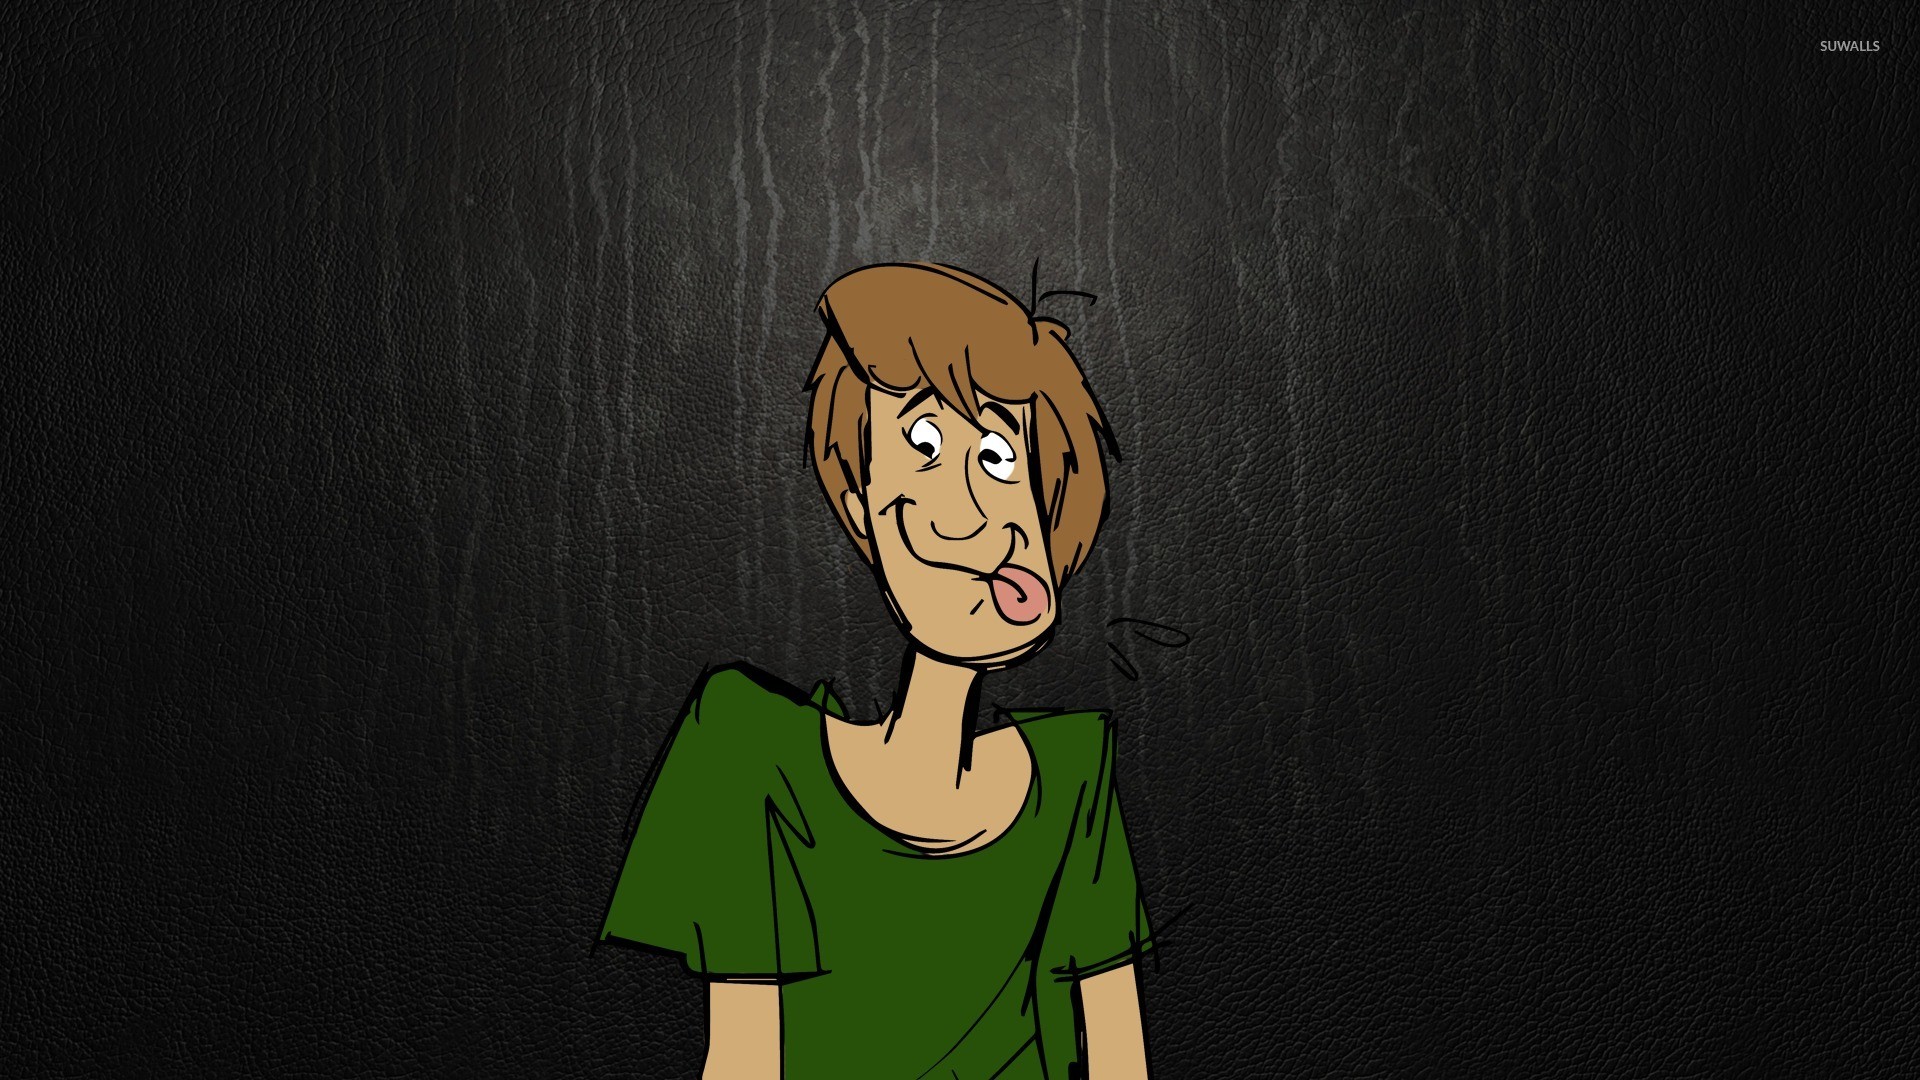 1920x1080 Silly Shaggy Rogers - Scooby-Doo wallpaper